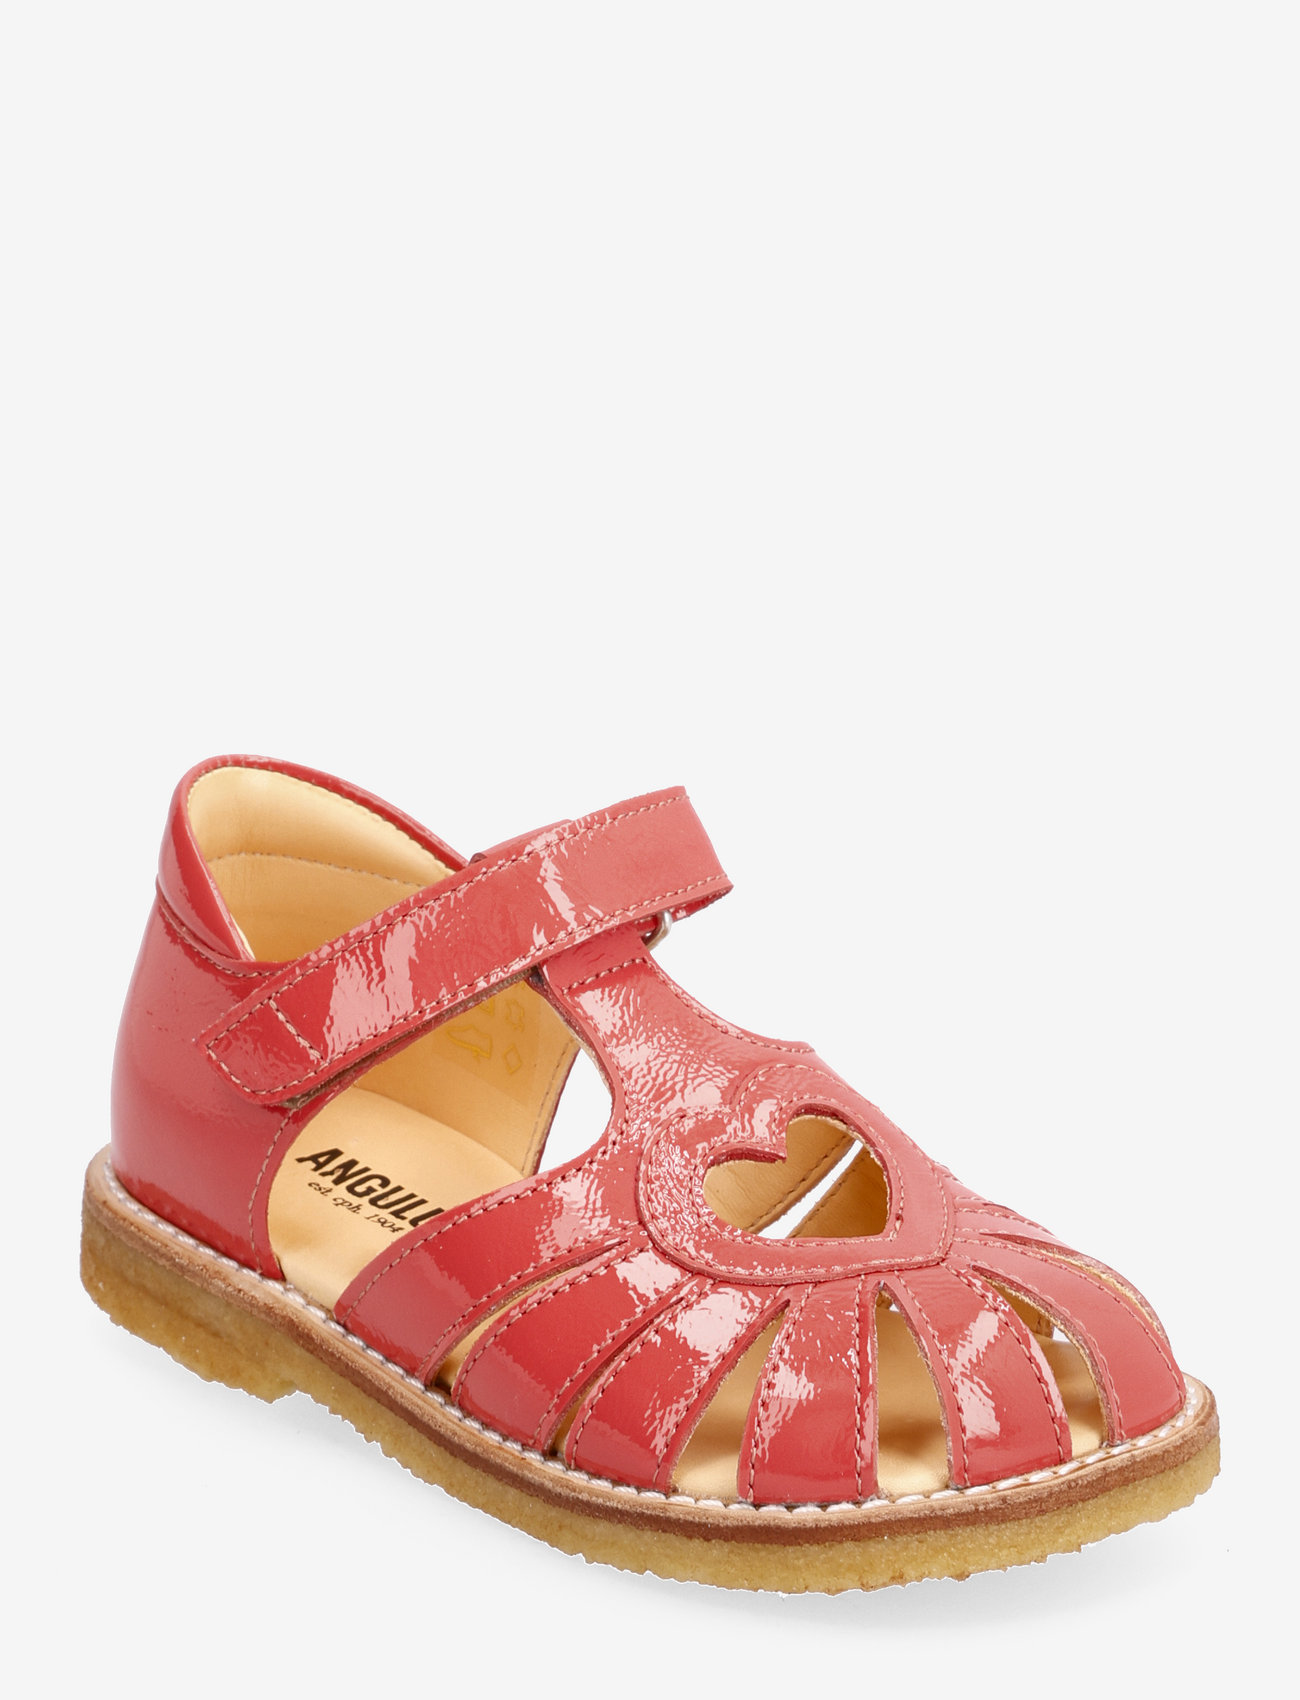 ANGULUS - Sandals - flat - closed toe - - sommarfynd - 1318 coral - 0